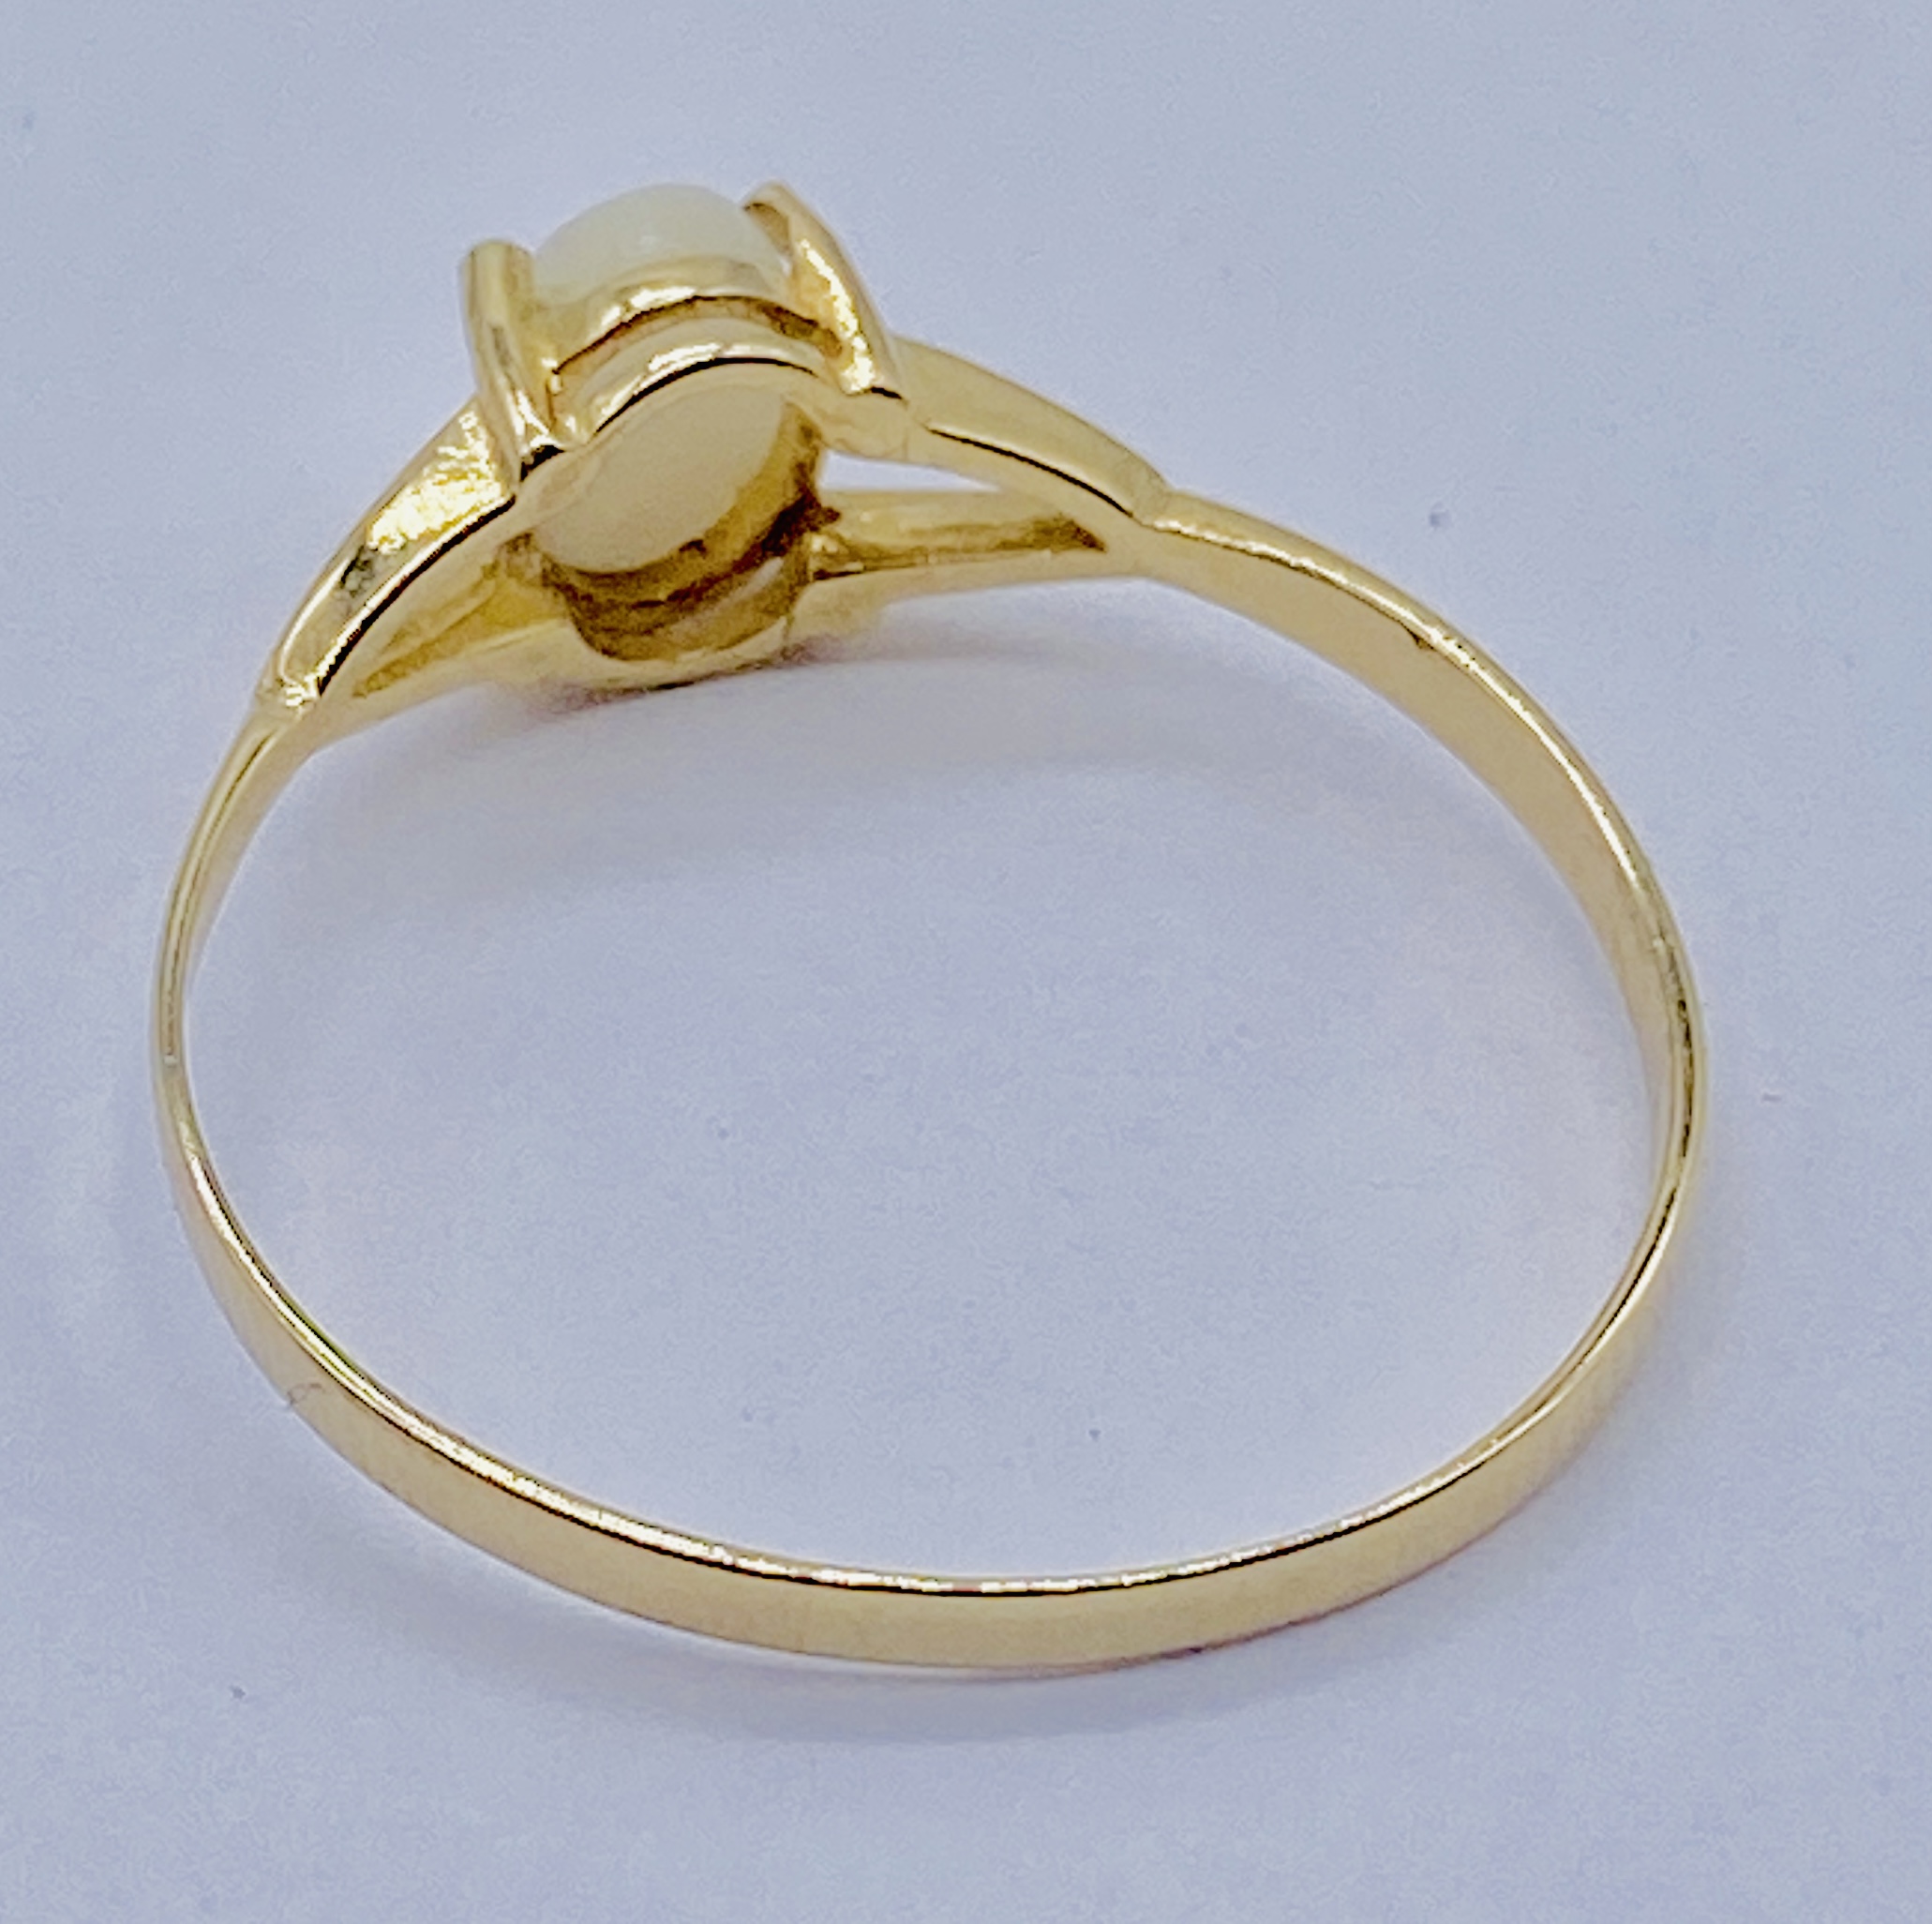 A tested 9ct gold ring, size M 1/2 - Image 2 of 2